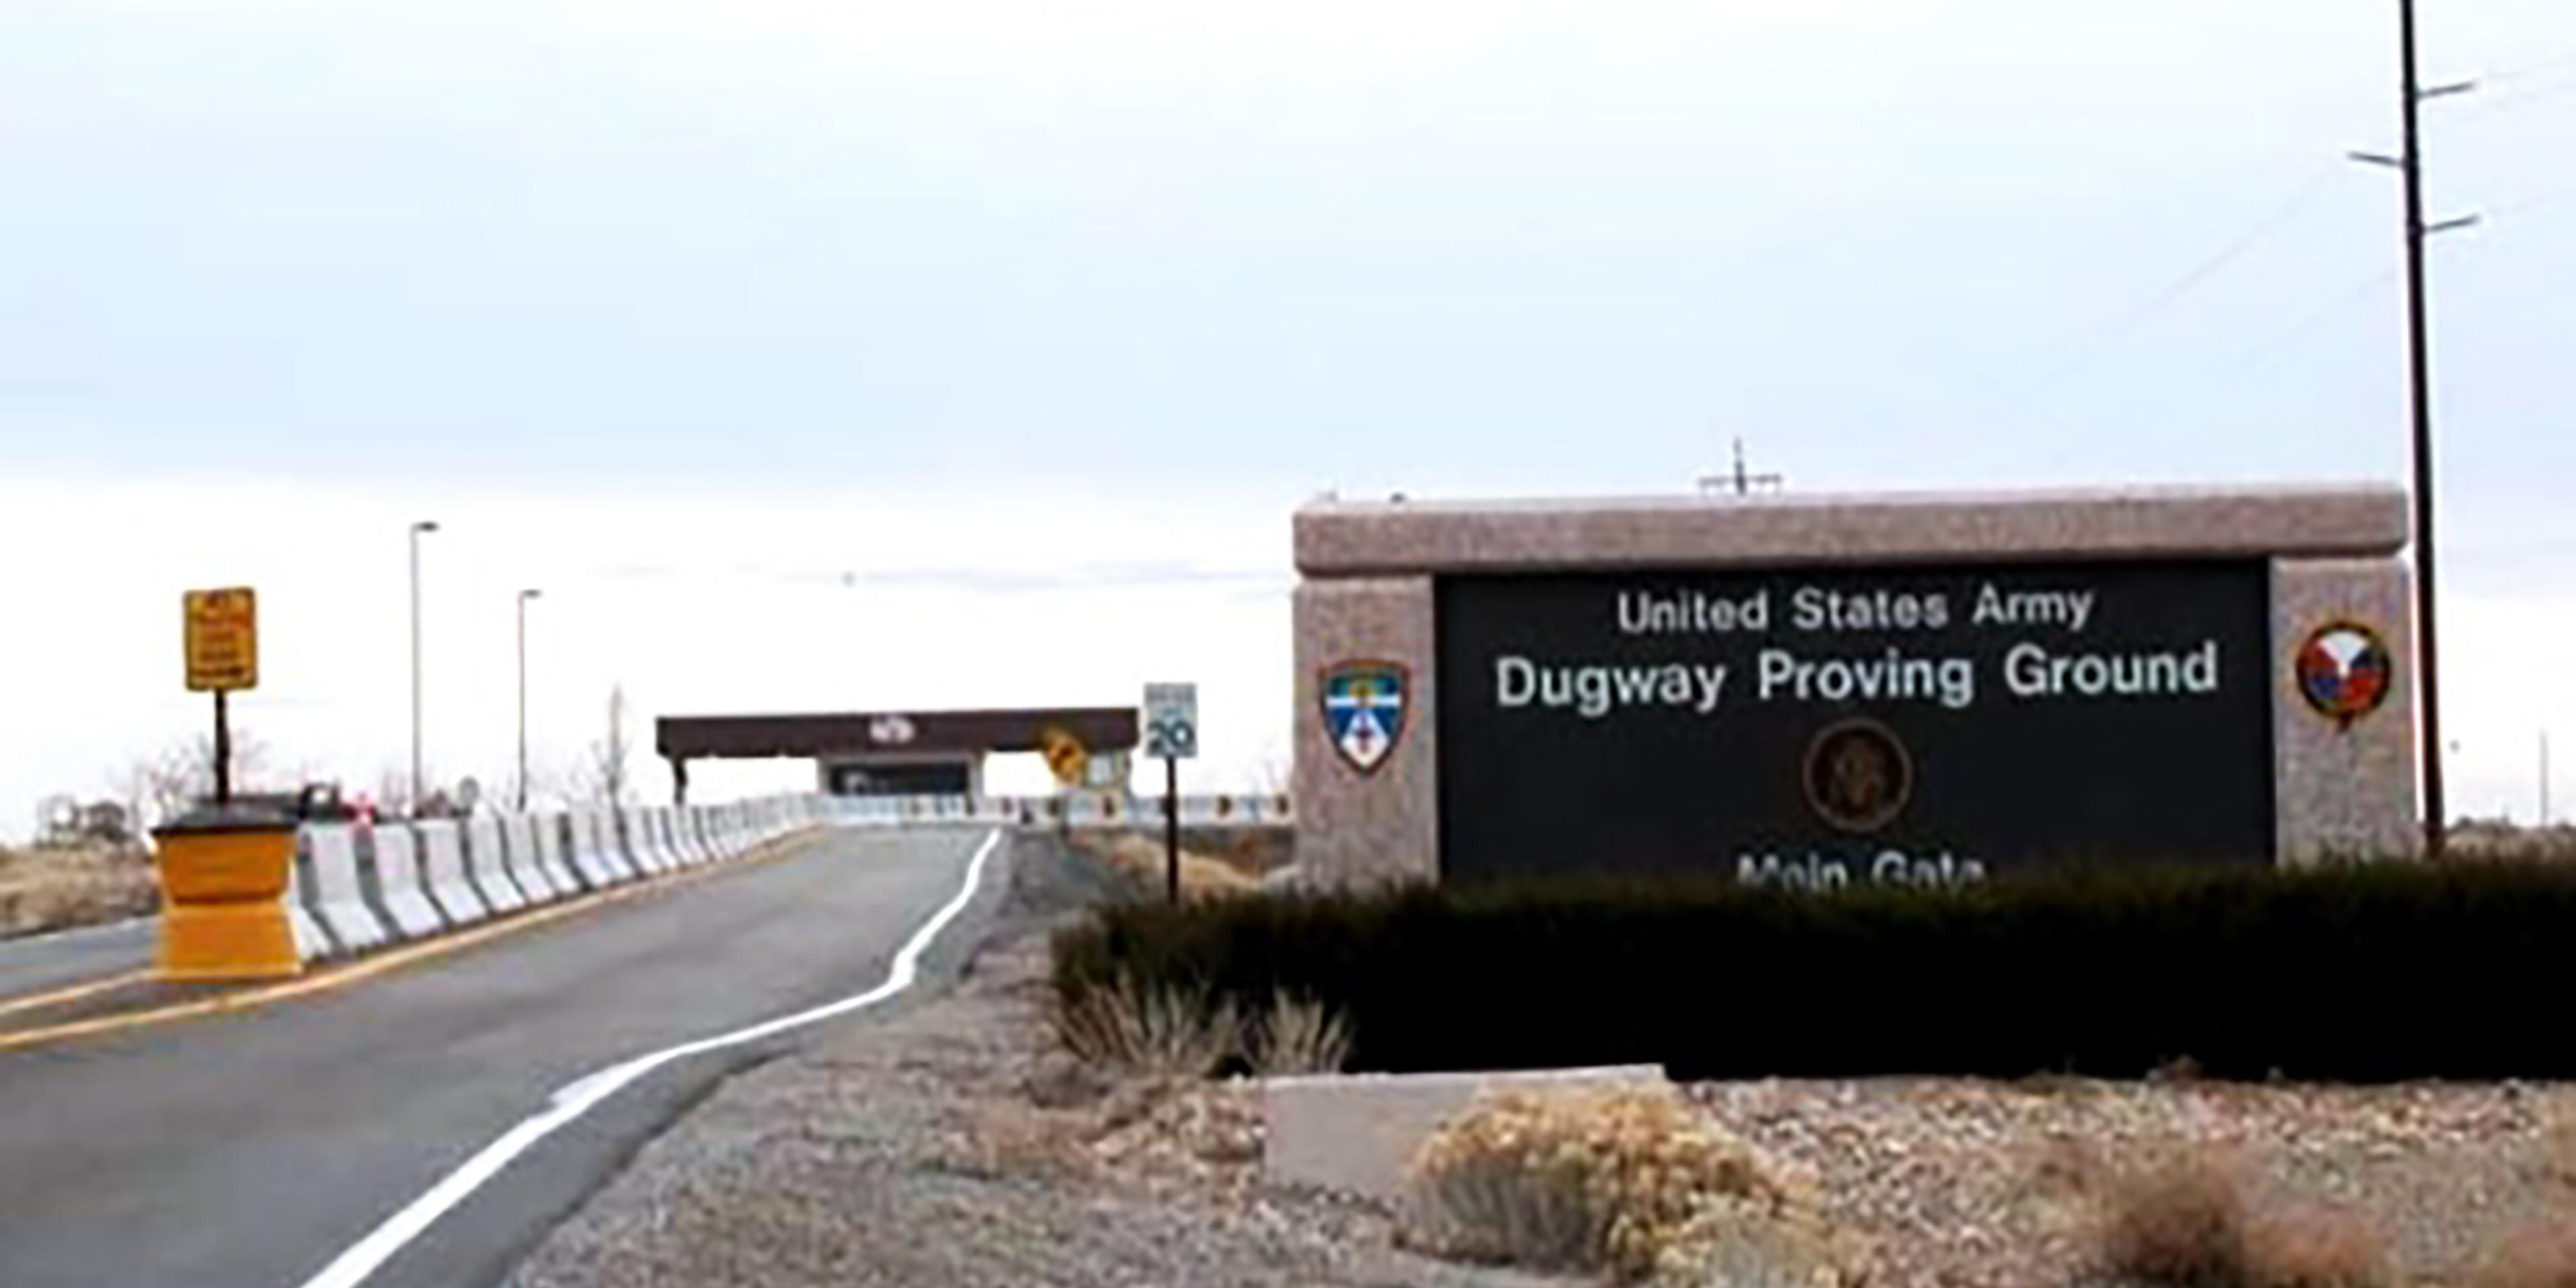 Dugway Proving Ground and Tooele Army Depot both military bases located in Tooele County.